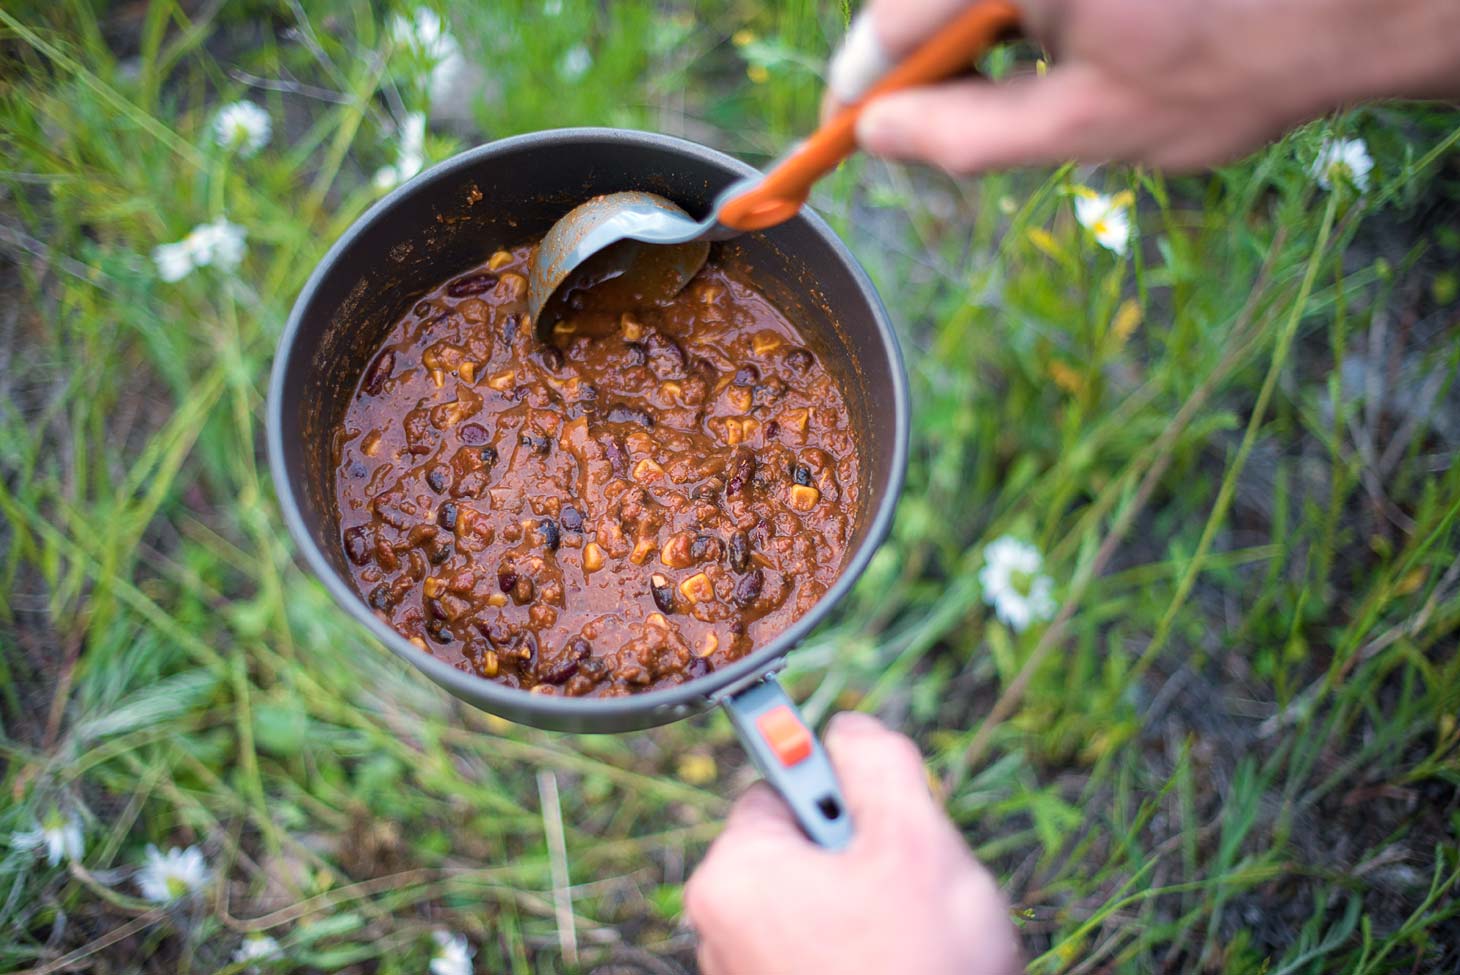 DIY Backpacking Food - a healthy vegan quinoa chili made with a dehydrator, perfect for your backcountry adventures.